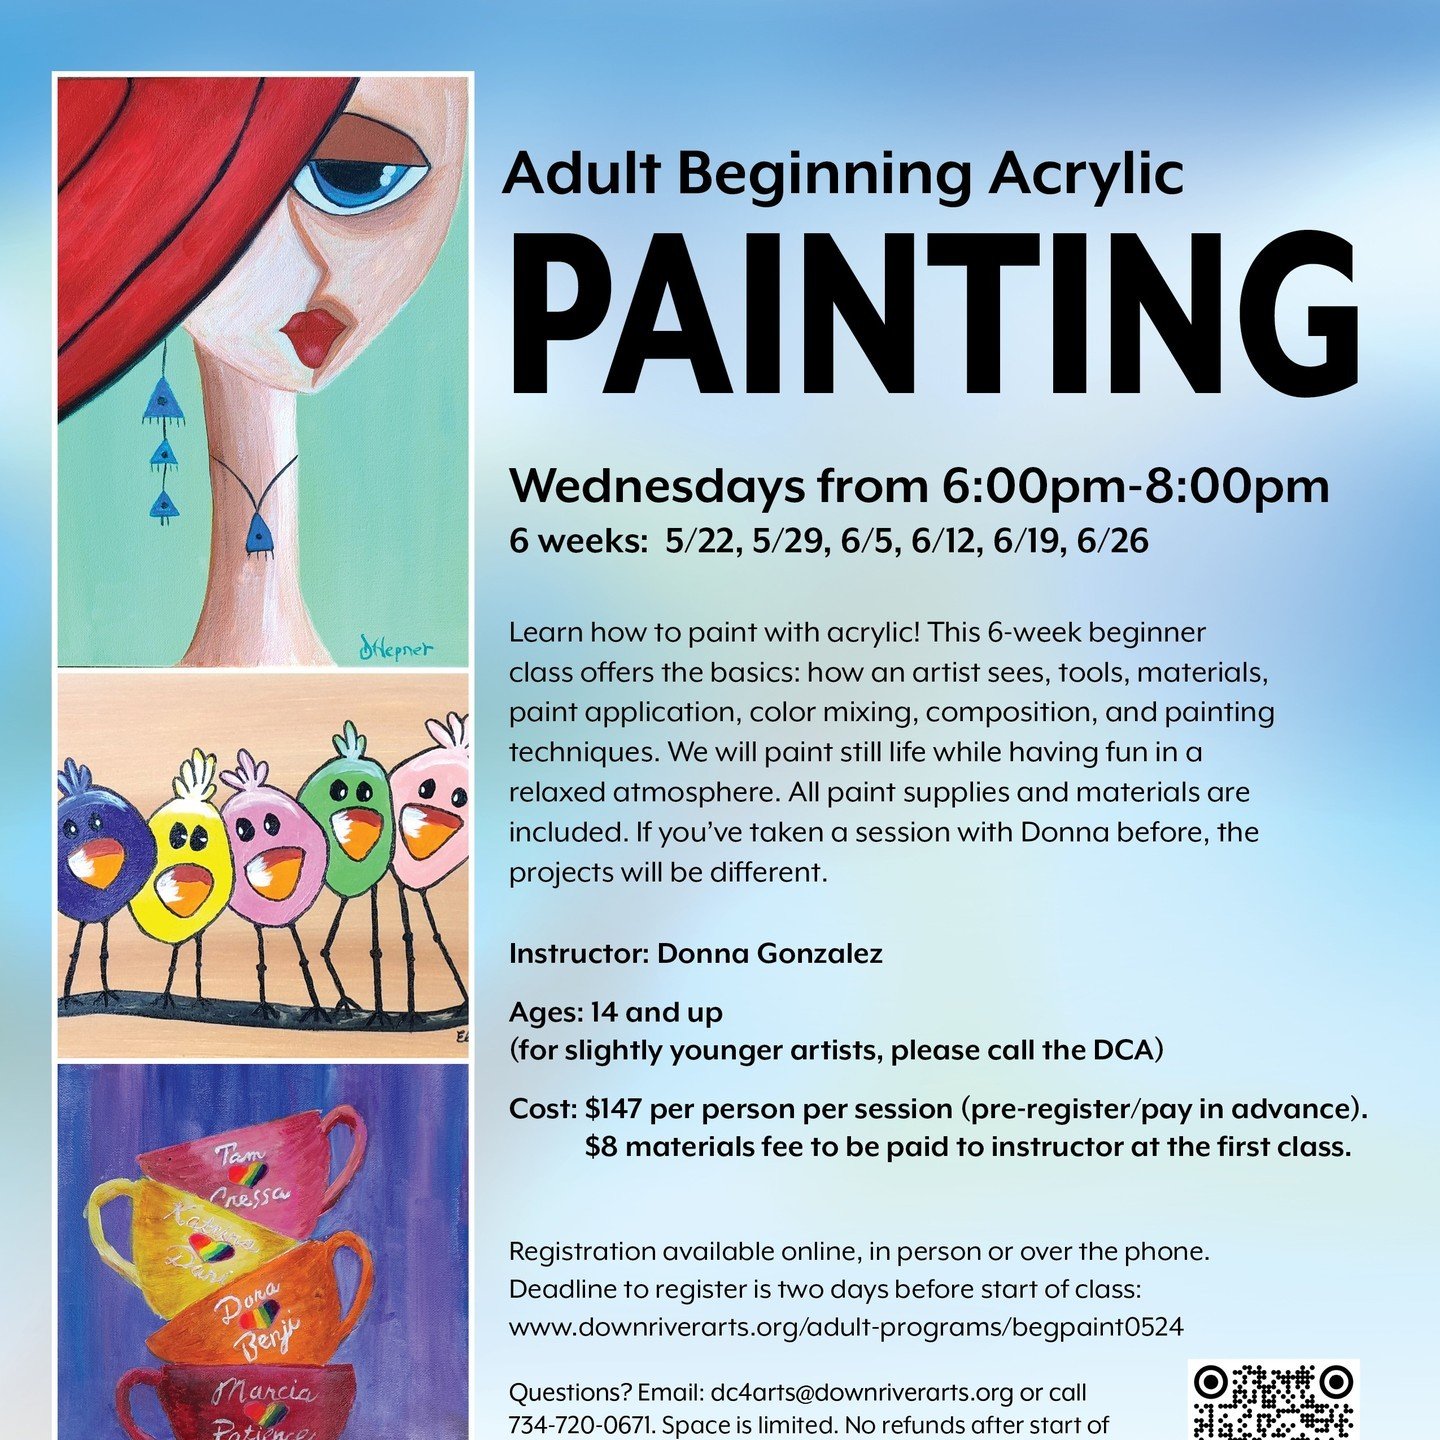 New start date for Adult Beginning Acrylics! This 6-week beginner class offers the basics: how an artist sees, tools, materials, paint application, color mixing, composition, and painting techniques. We will paint still life while having fun in a rel